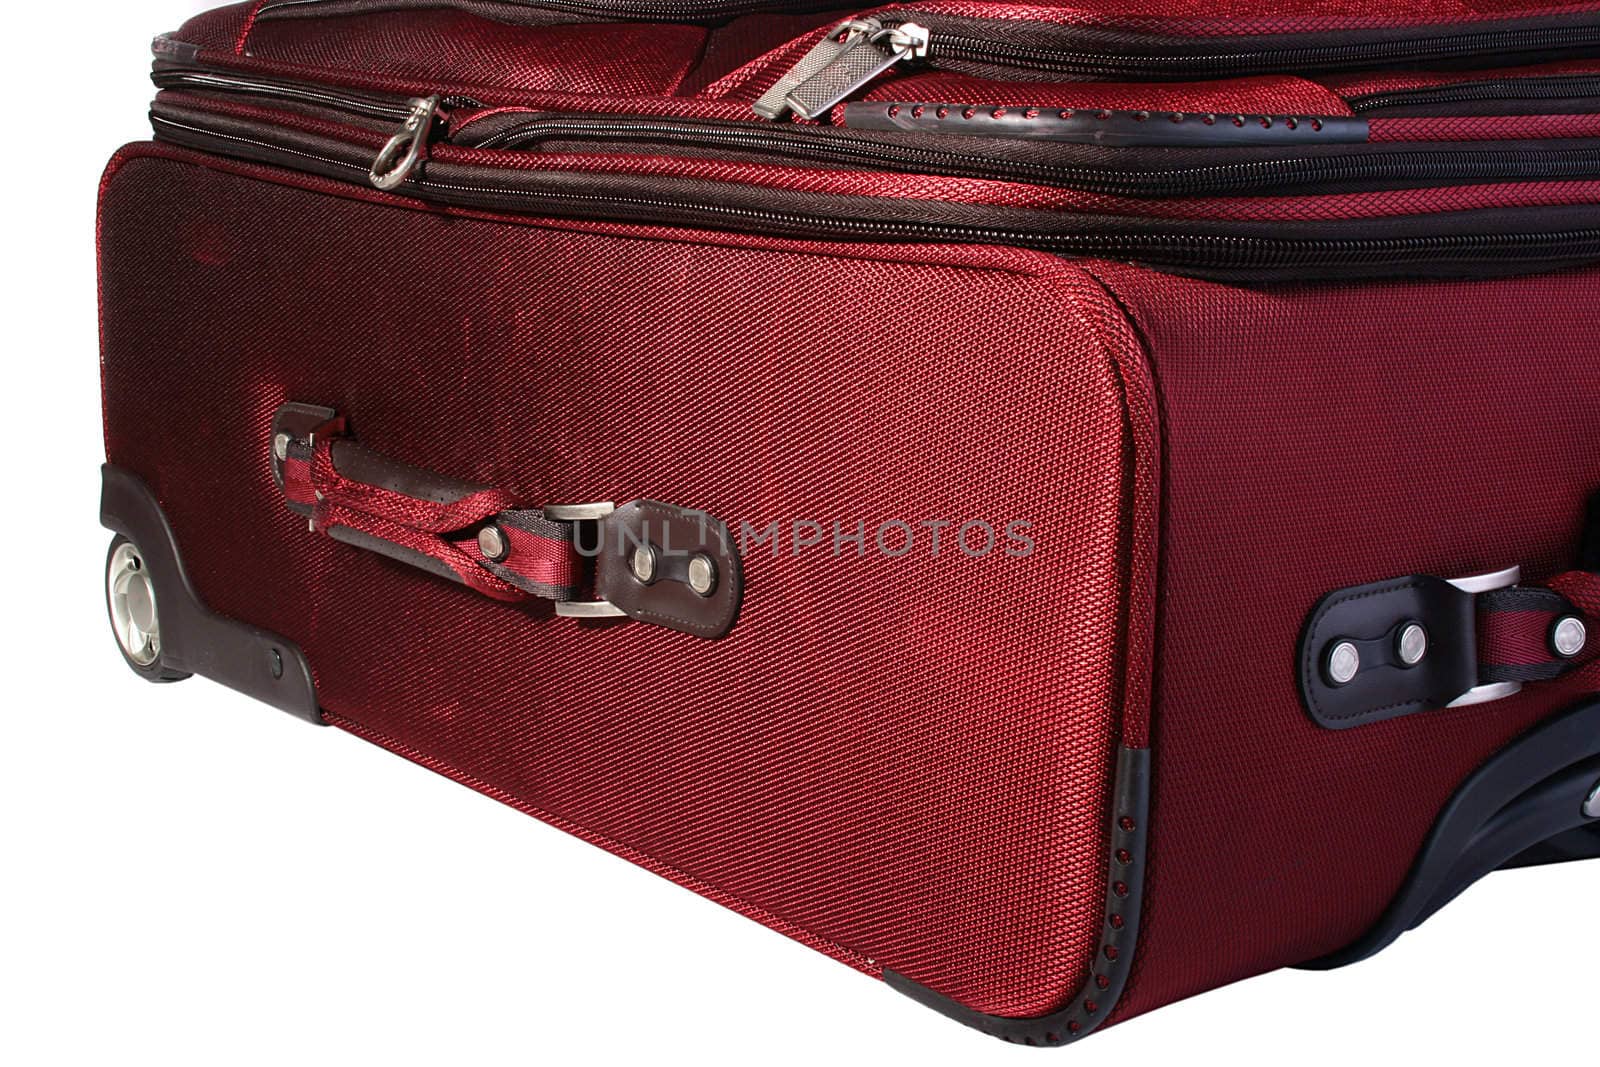 Red suitcase by VIPDesignUSA